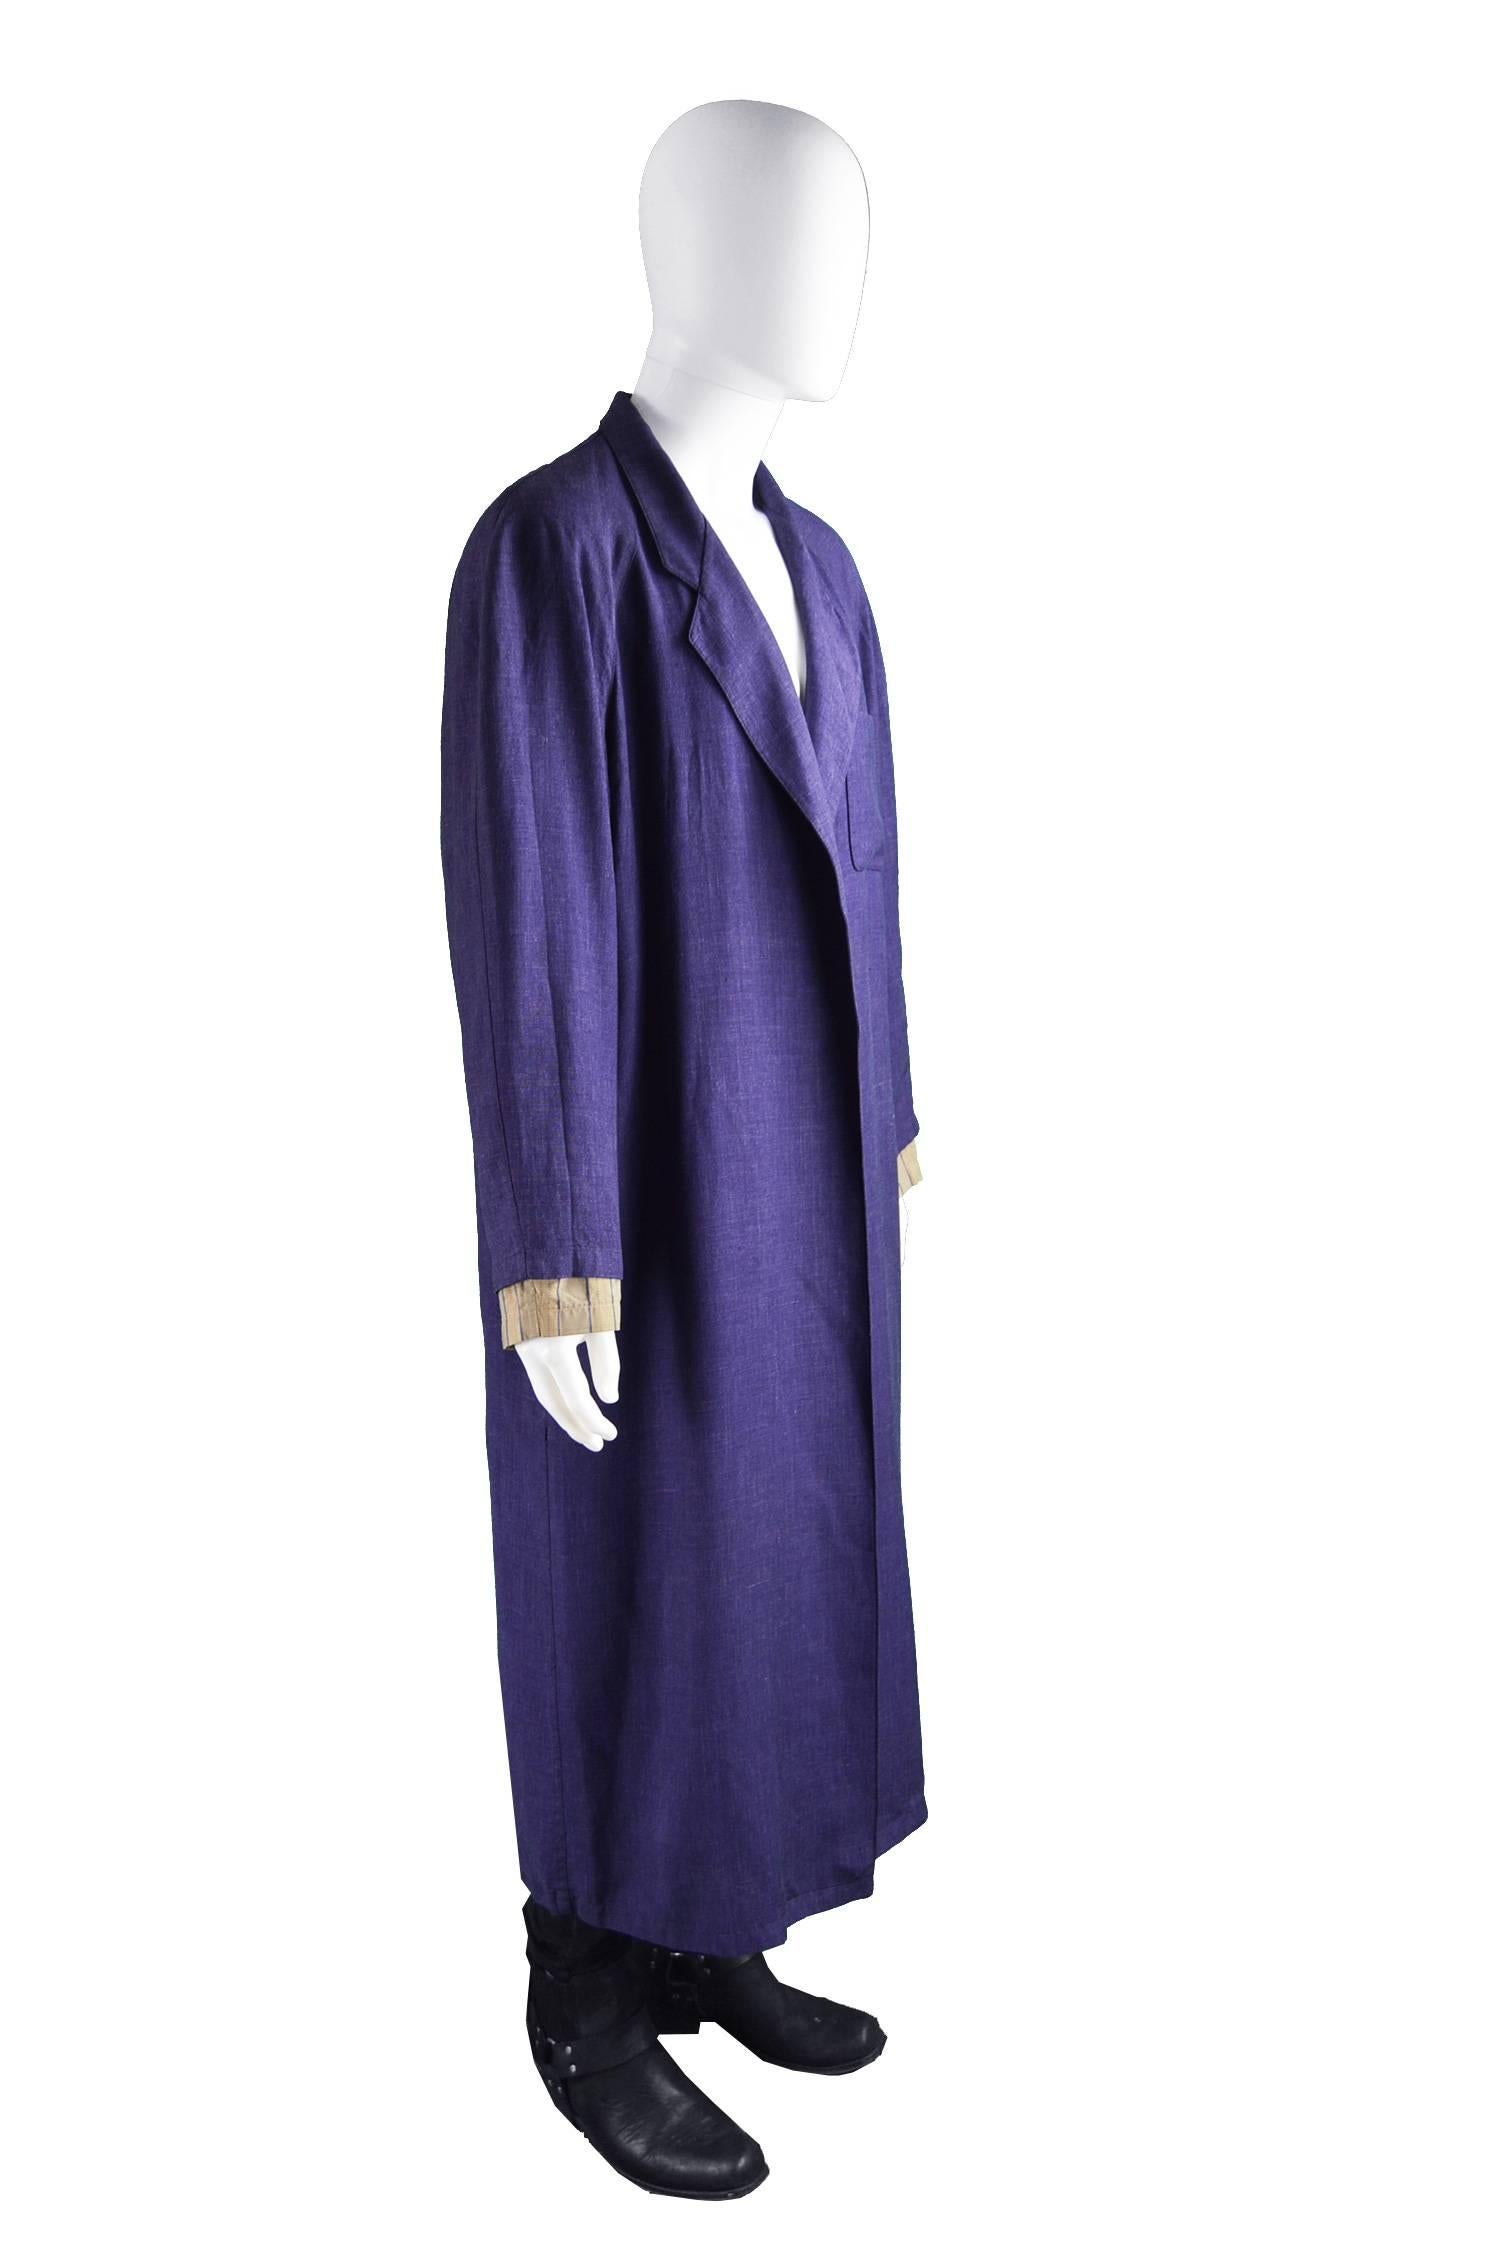 Jean Paul Gaultier Homme Pour Gibo Loose Purple Linen Coat, 1980s In Excellent Condition For Sale In Doncaster, South Yorkshire